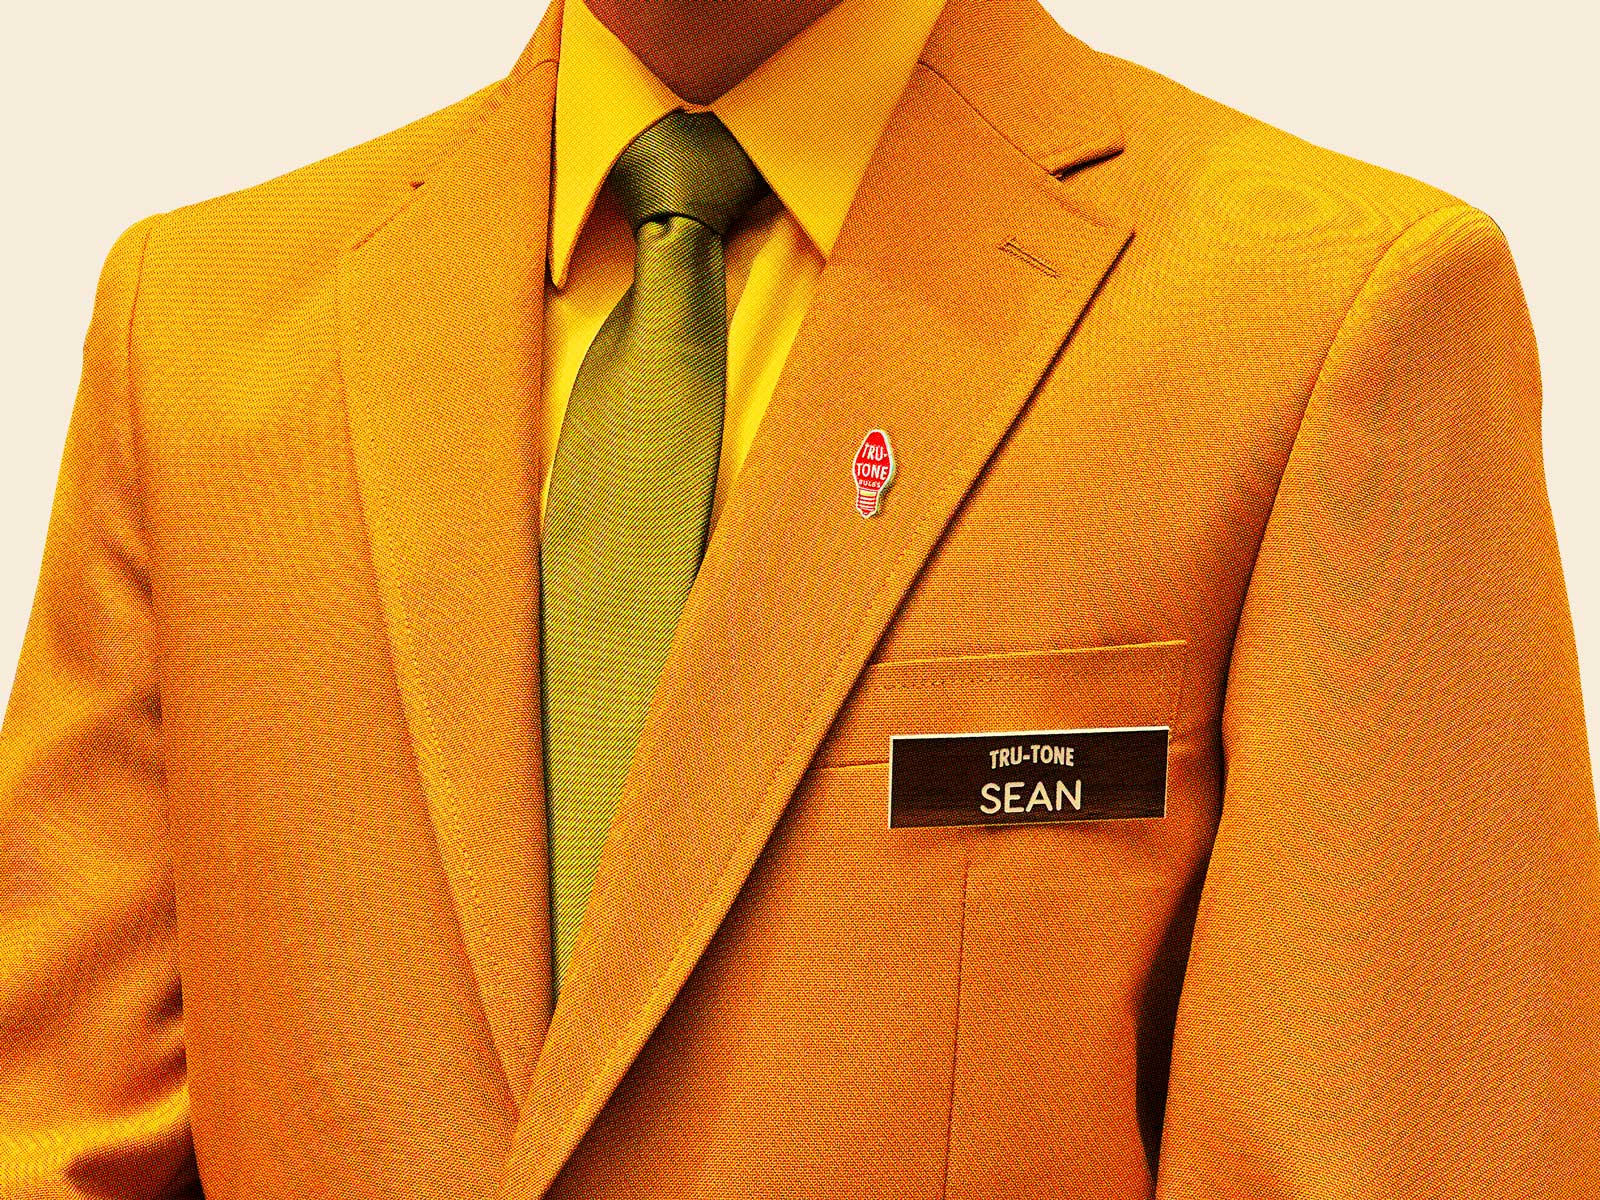 Golden blazer with Tru-Tone pin and employee name tag